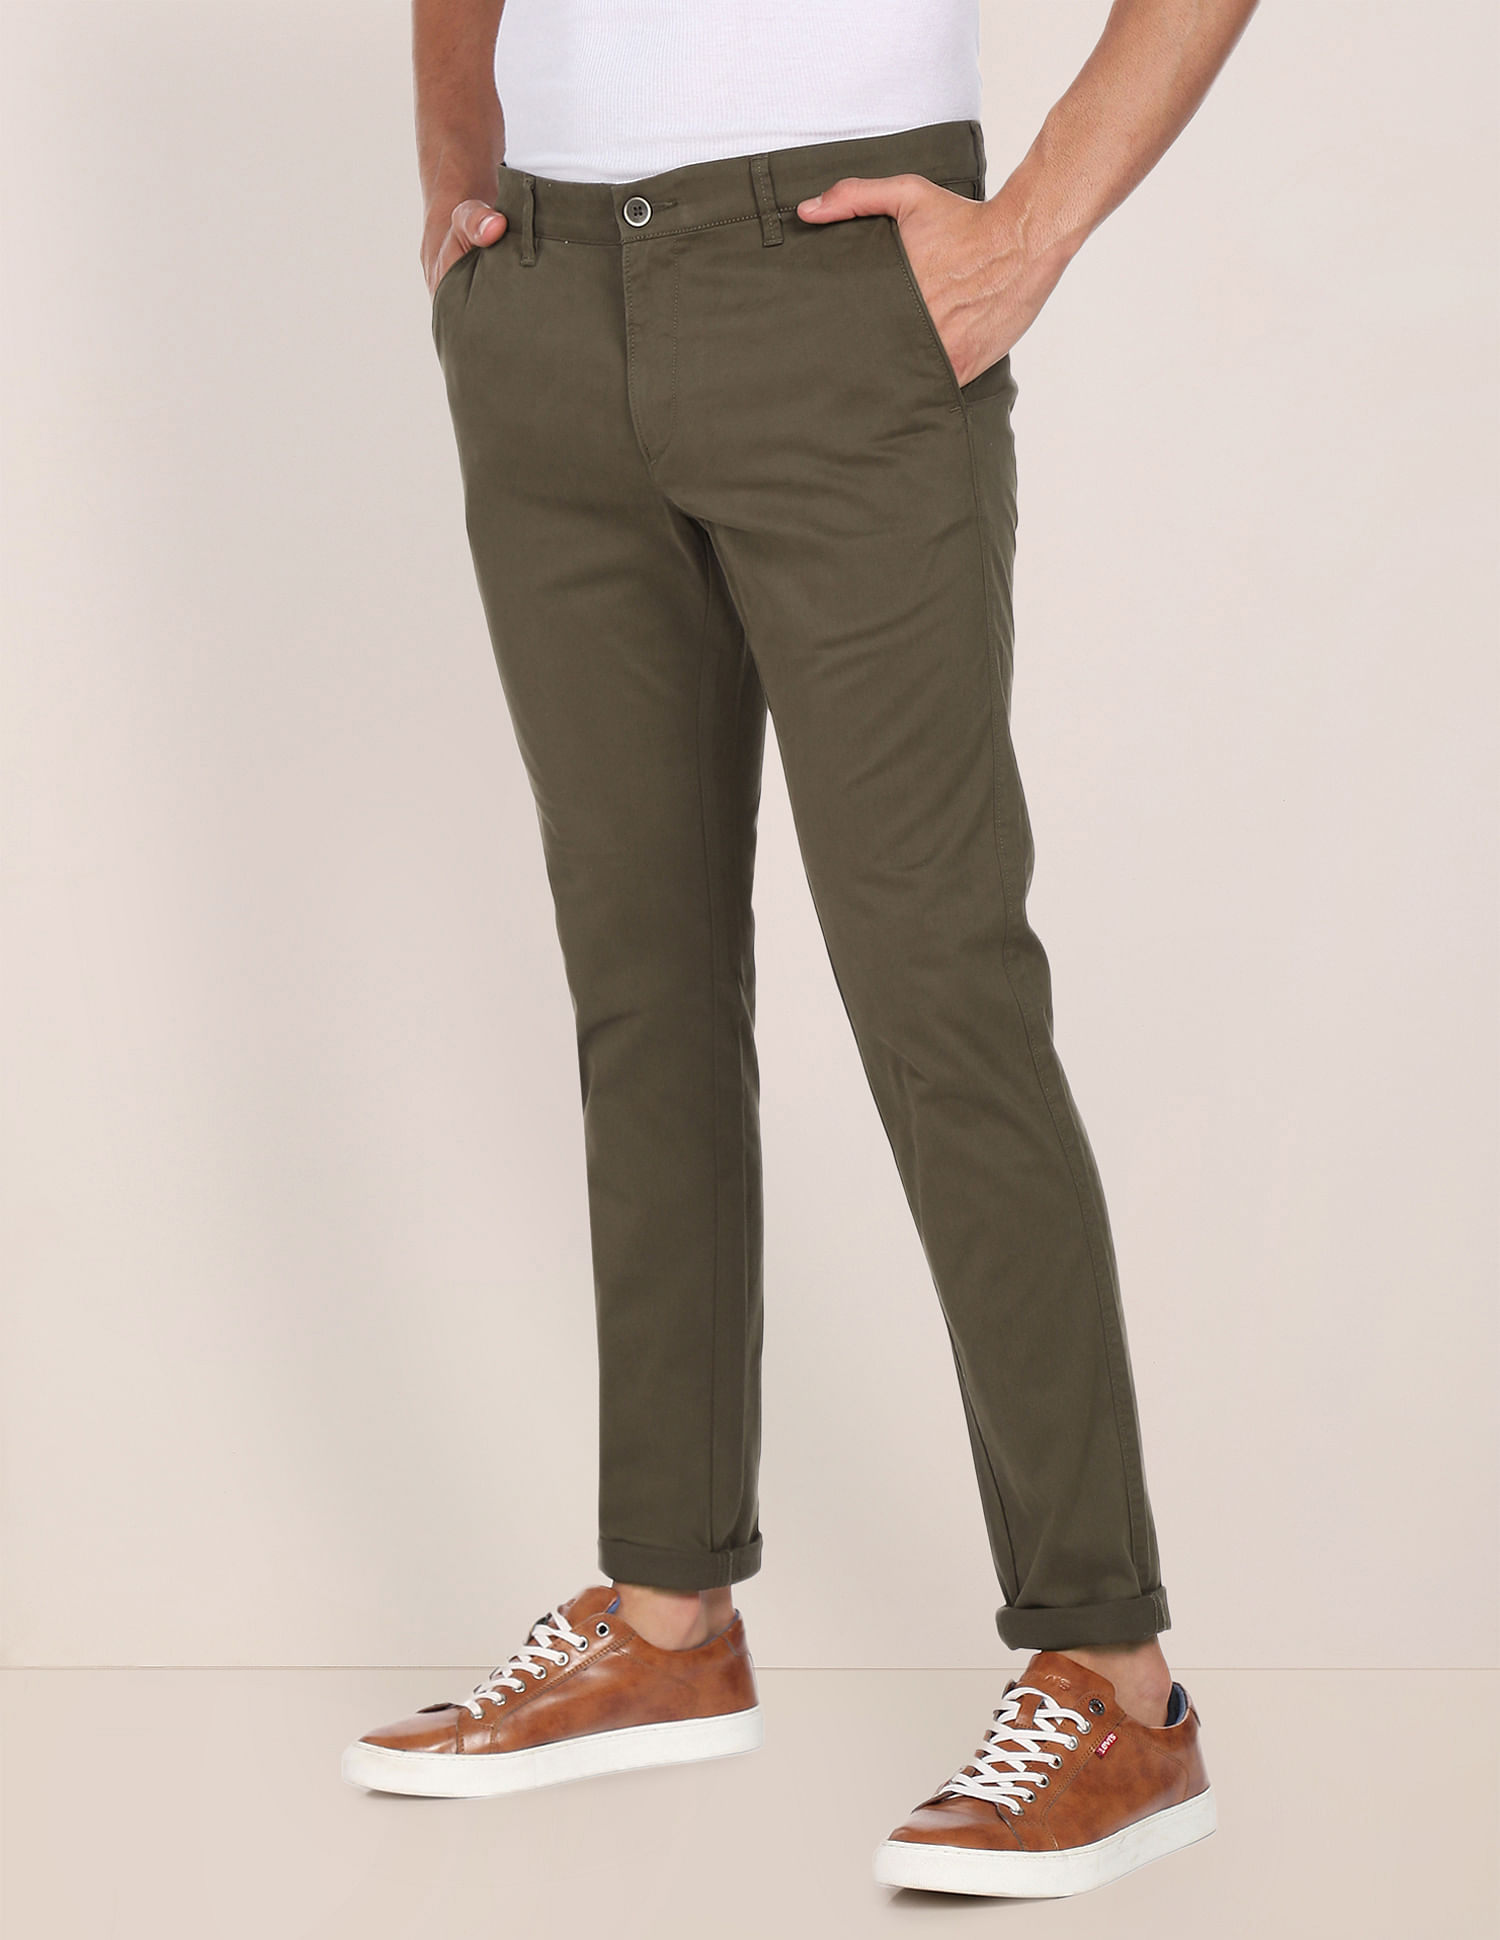 Dark Olive Brown Aeropostale Twill Skinny Fit Chinos Trousers Size 34   32